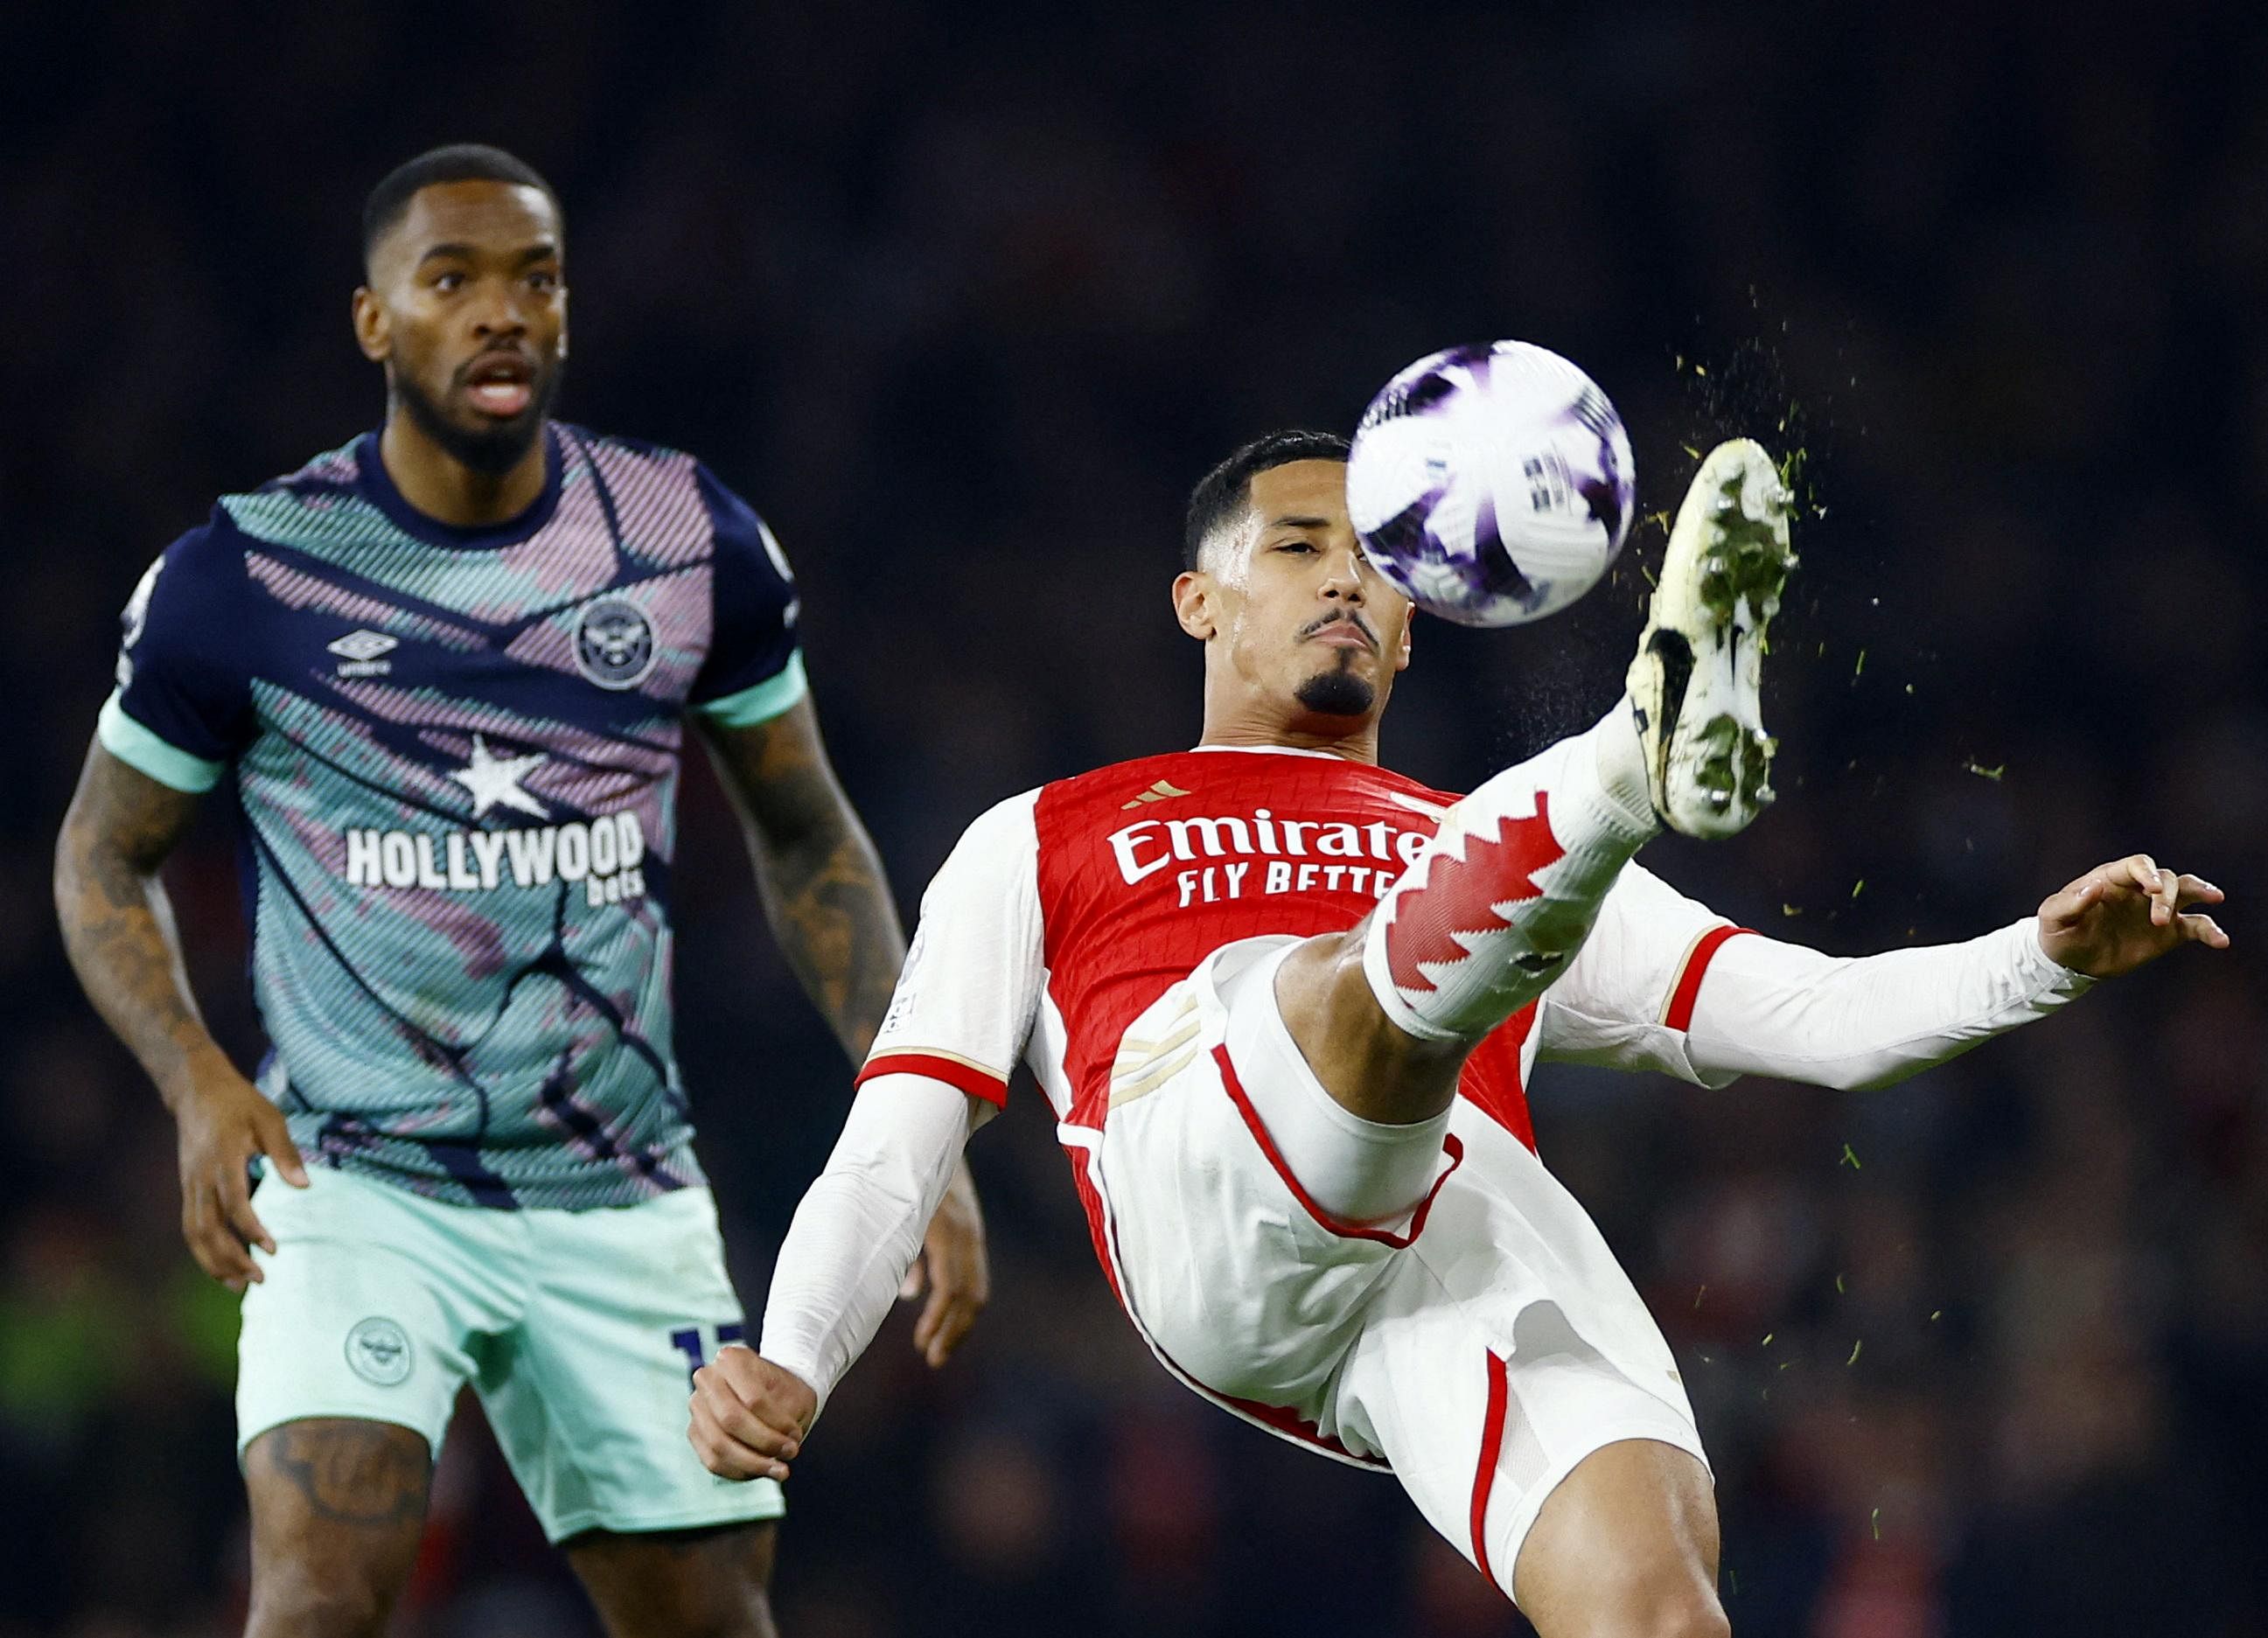 Arsenal’s William Saliba confident of seeing off ‘smart and experienced’ Porto in Champions League last 16